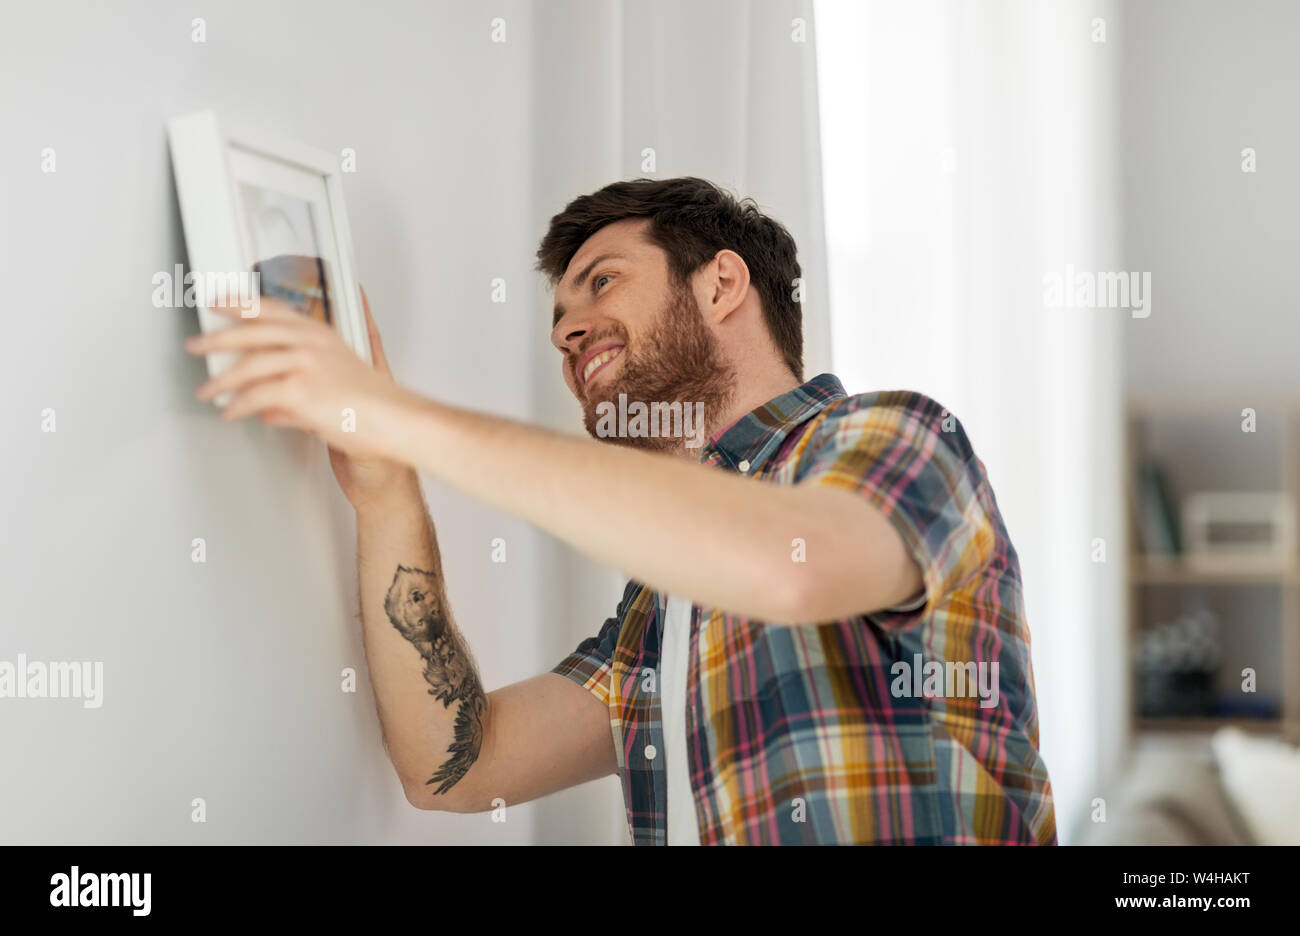 man hanging picture in frame to wall at home Stock Photo